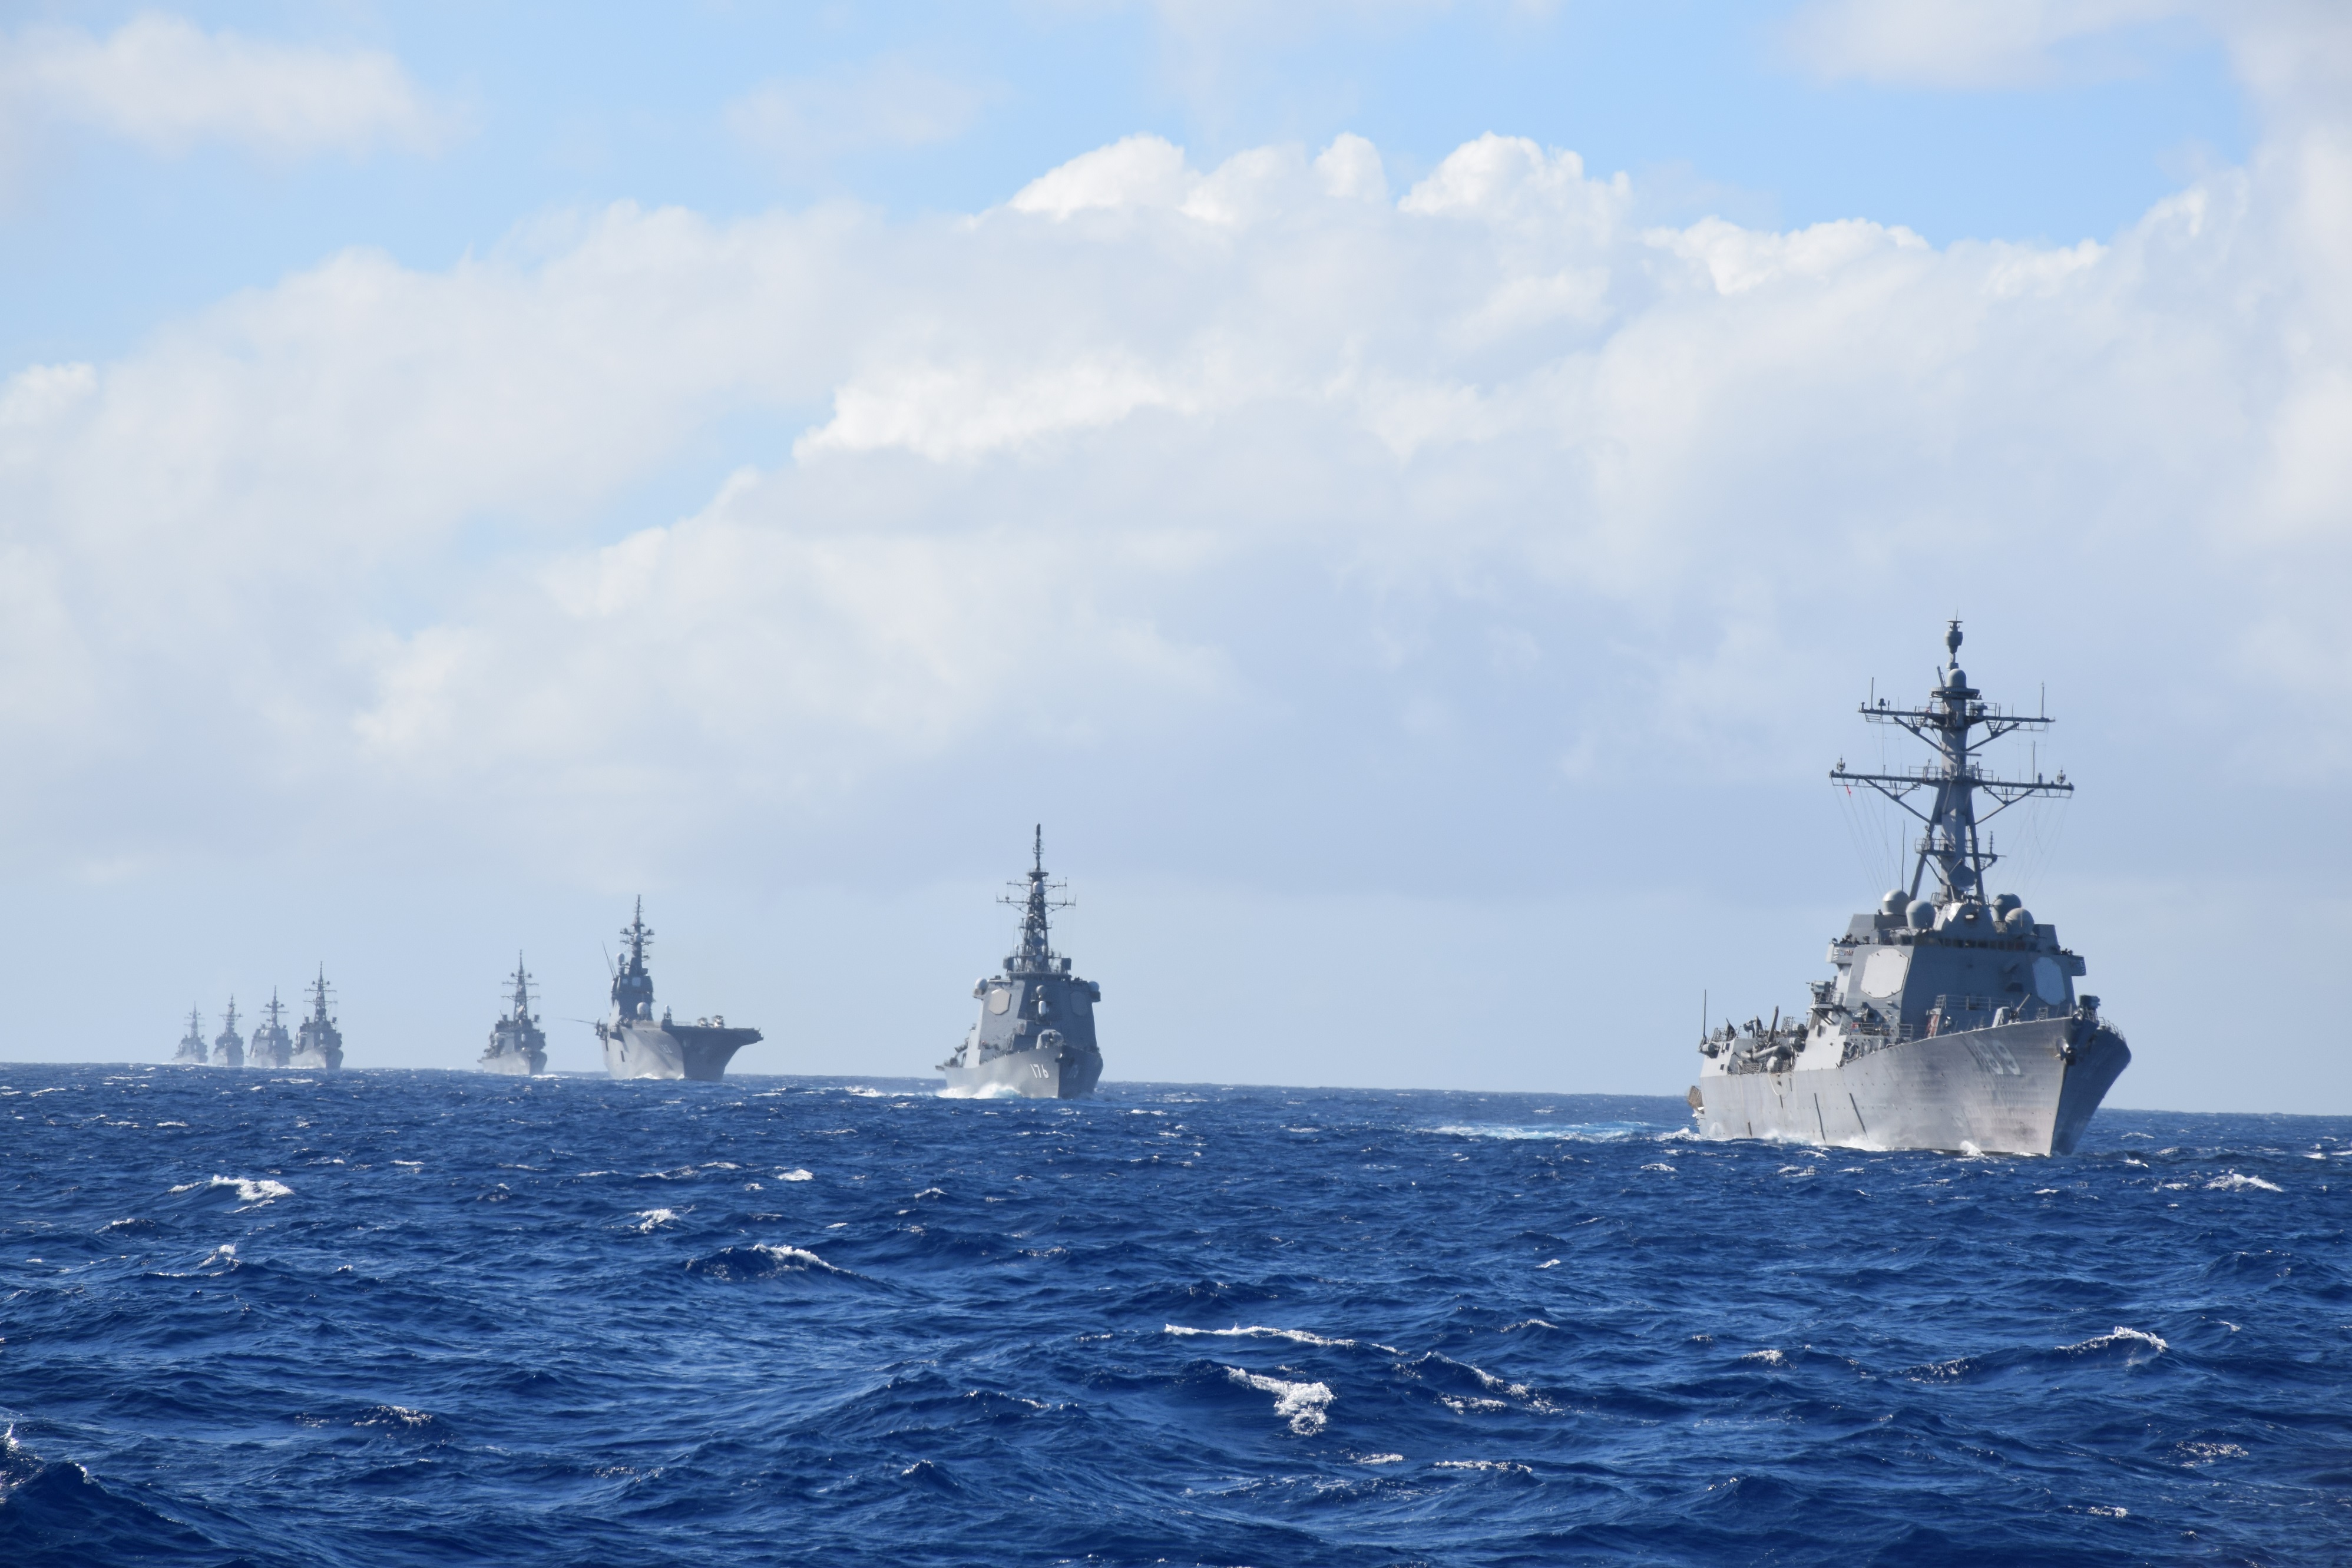 The Arleigh Burke-class guided missile destroyer USS McCampbell (DDG 85), not pictured, takes lead in a formation of ships from the U.S. Navy and Japan Maritime Self-Defense Force (JMSDF) as part of the annual bilateral Guam Exercise (GUAMEX) on Jan. 21, 2016. US Navy photo.